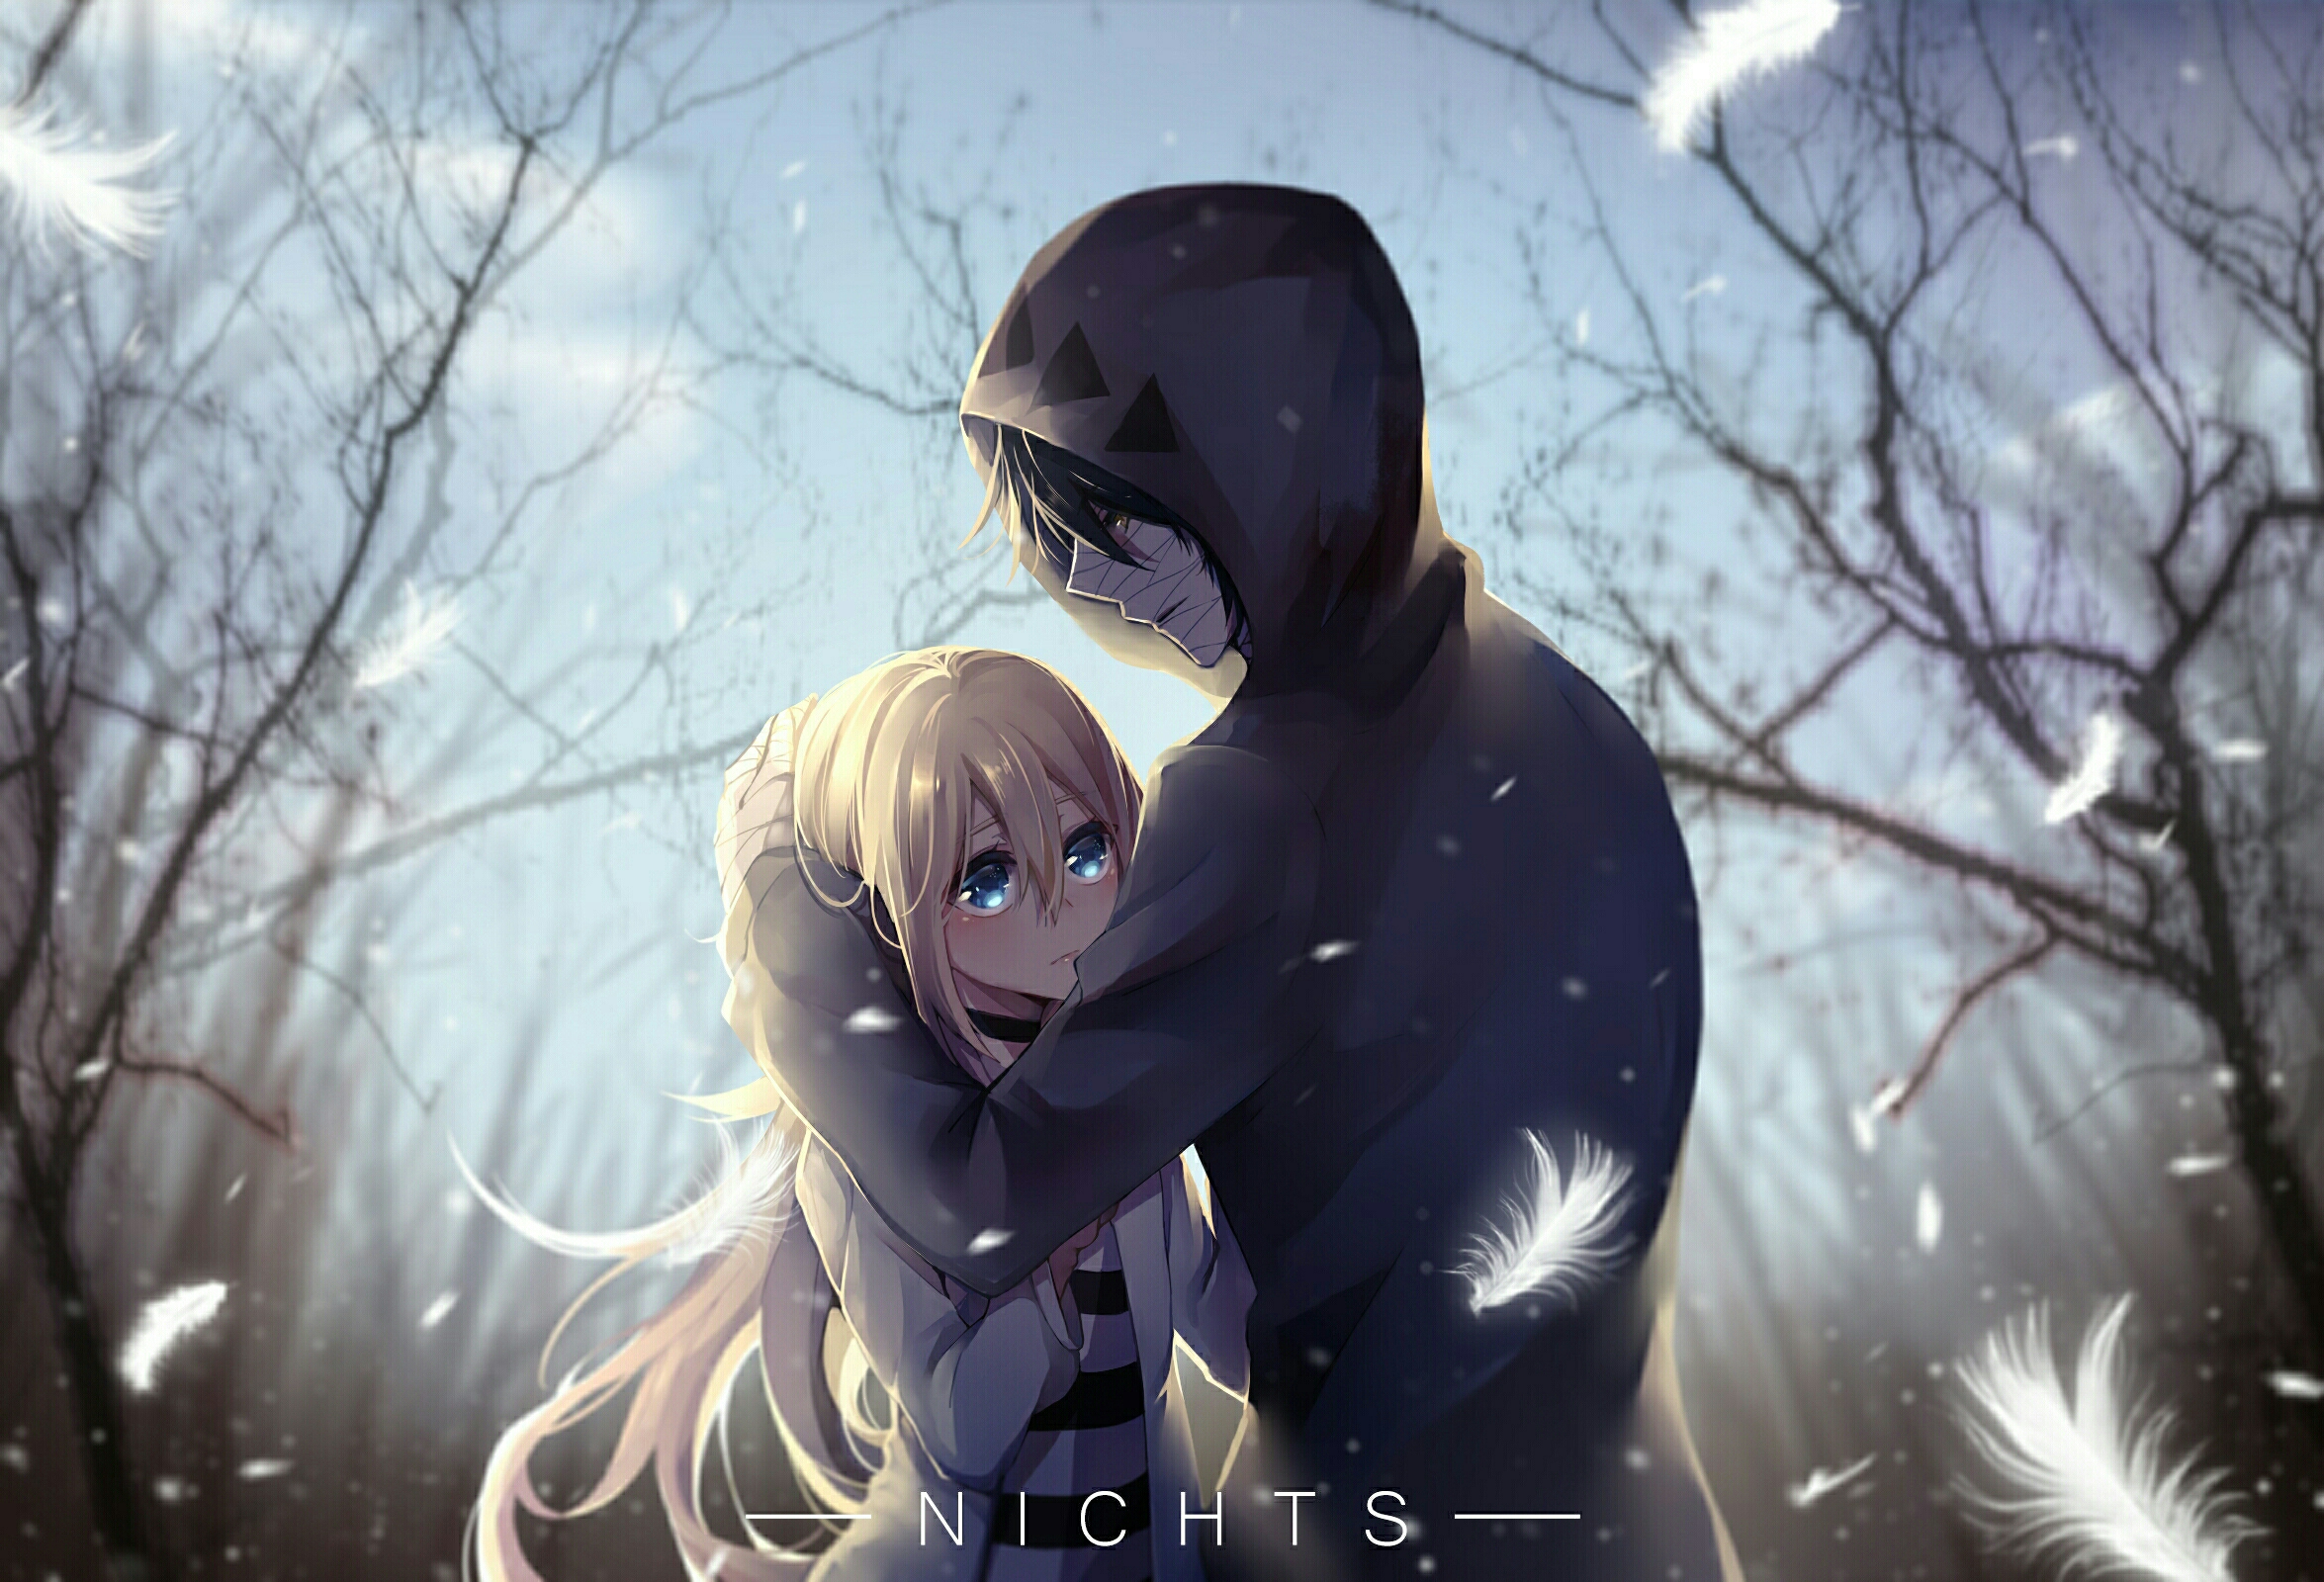 Anime Angels Of Death HD Wallpaper by Nichts